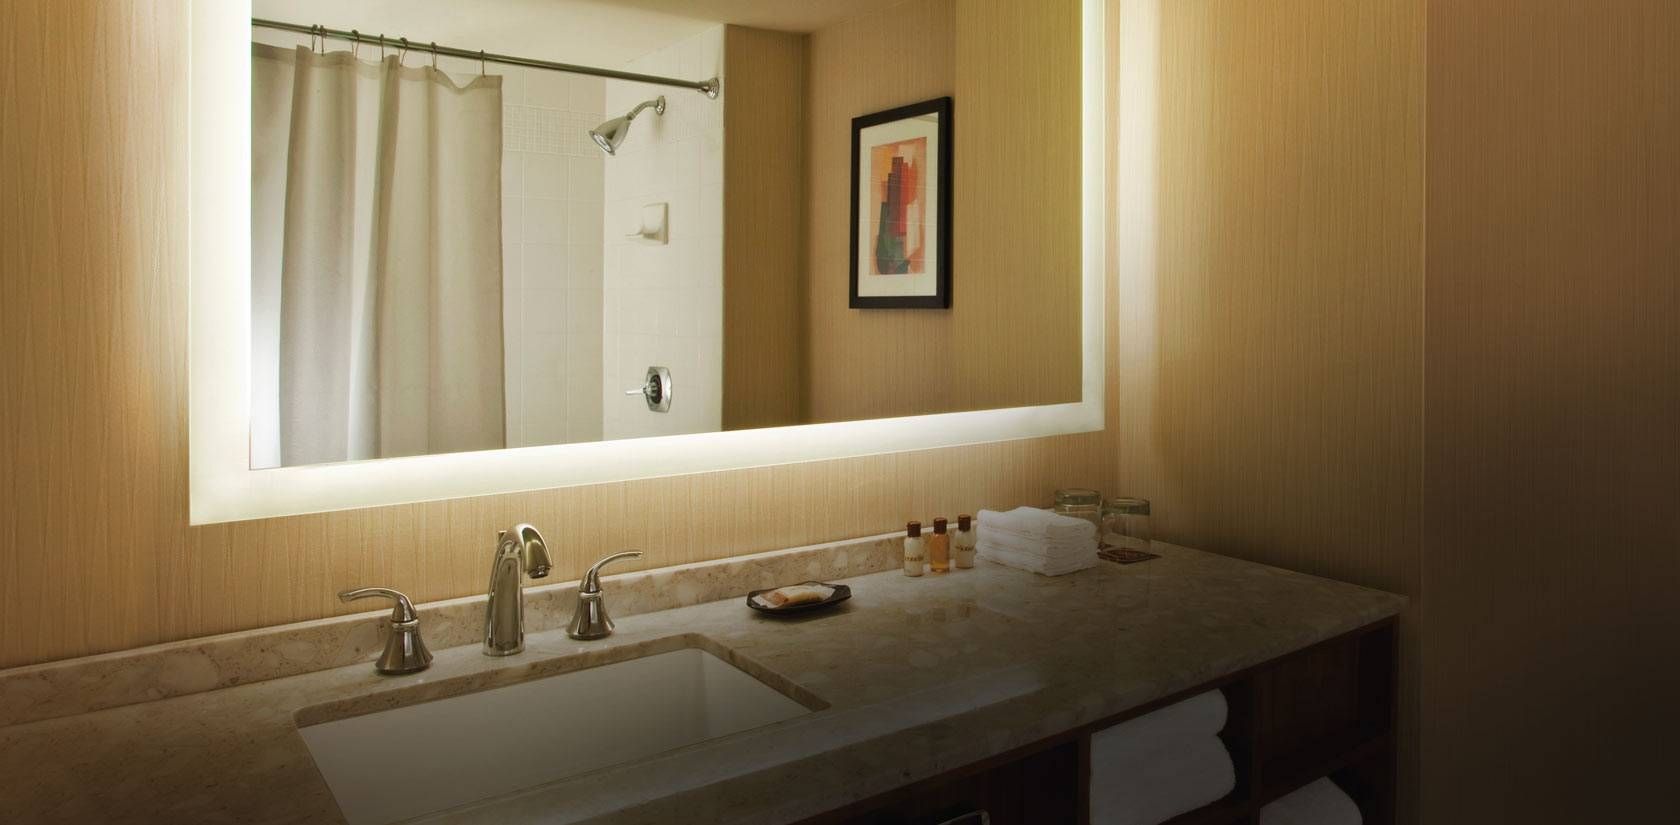 Bathroom Cabinets : Bathroom Mirrors Lighted Lighted Bathroom Throughout Large Illuminated Mirrors (View 4 of 15)